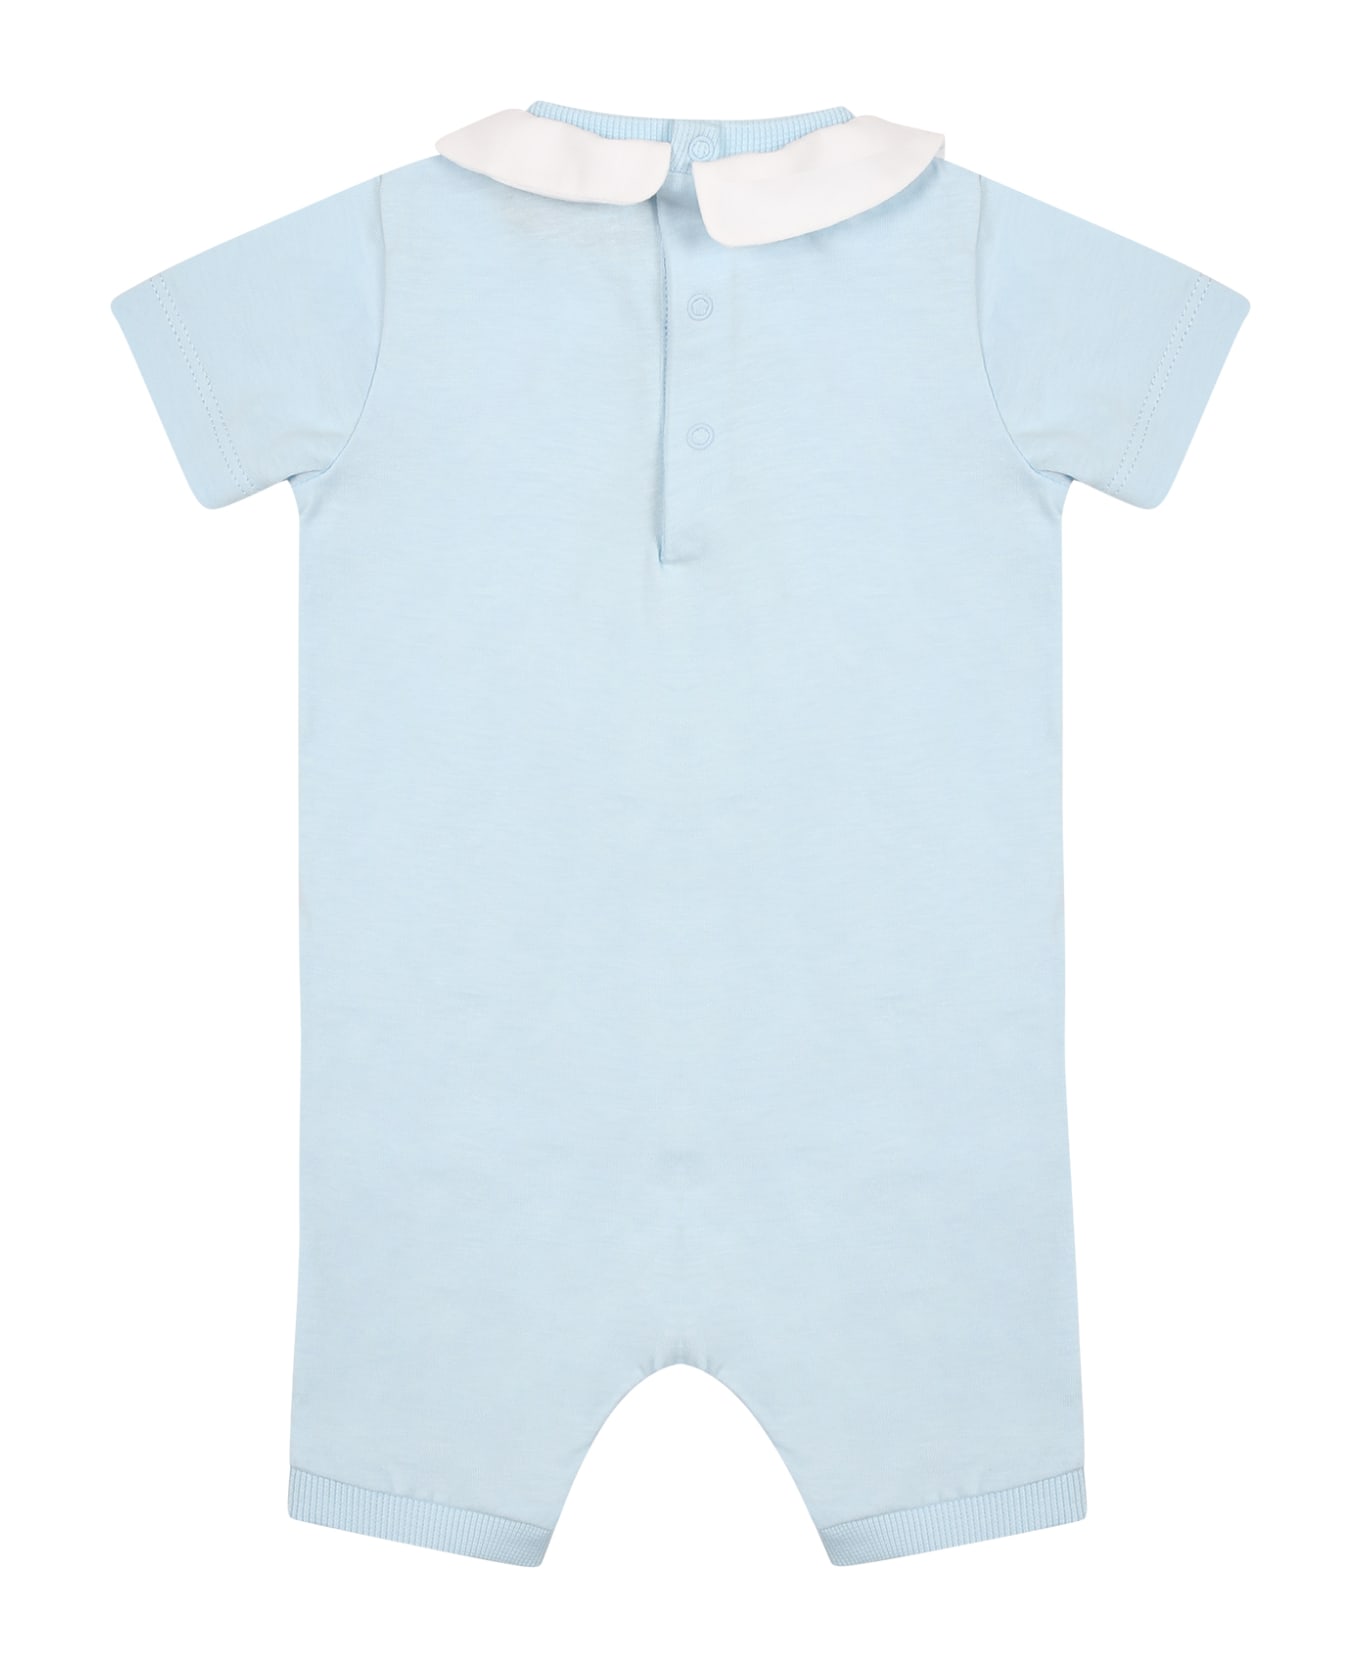 Moschino Light Blue Romper For Baby Boy With Teddy Bear And Logo - BLUE